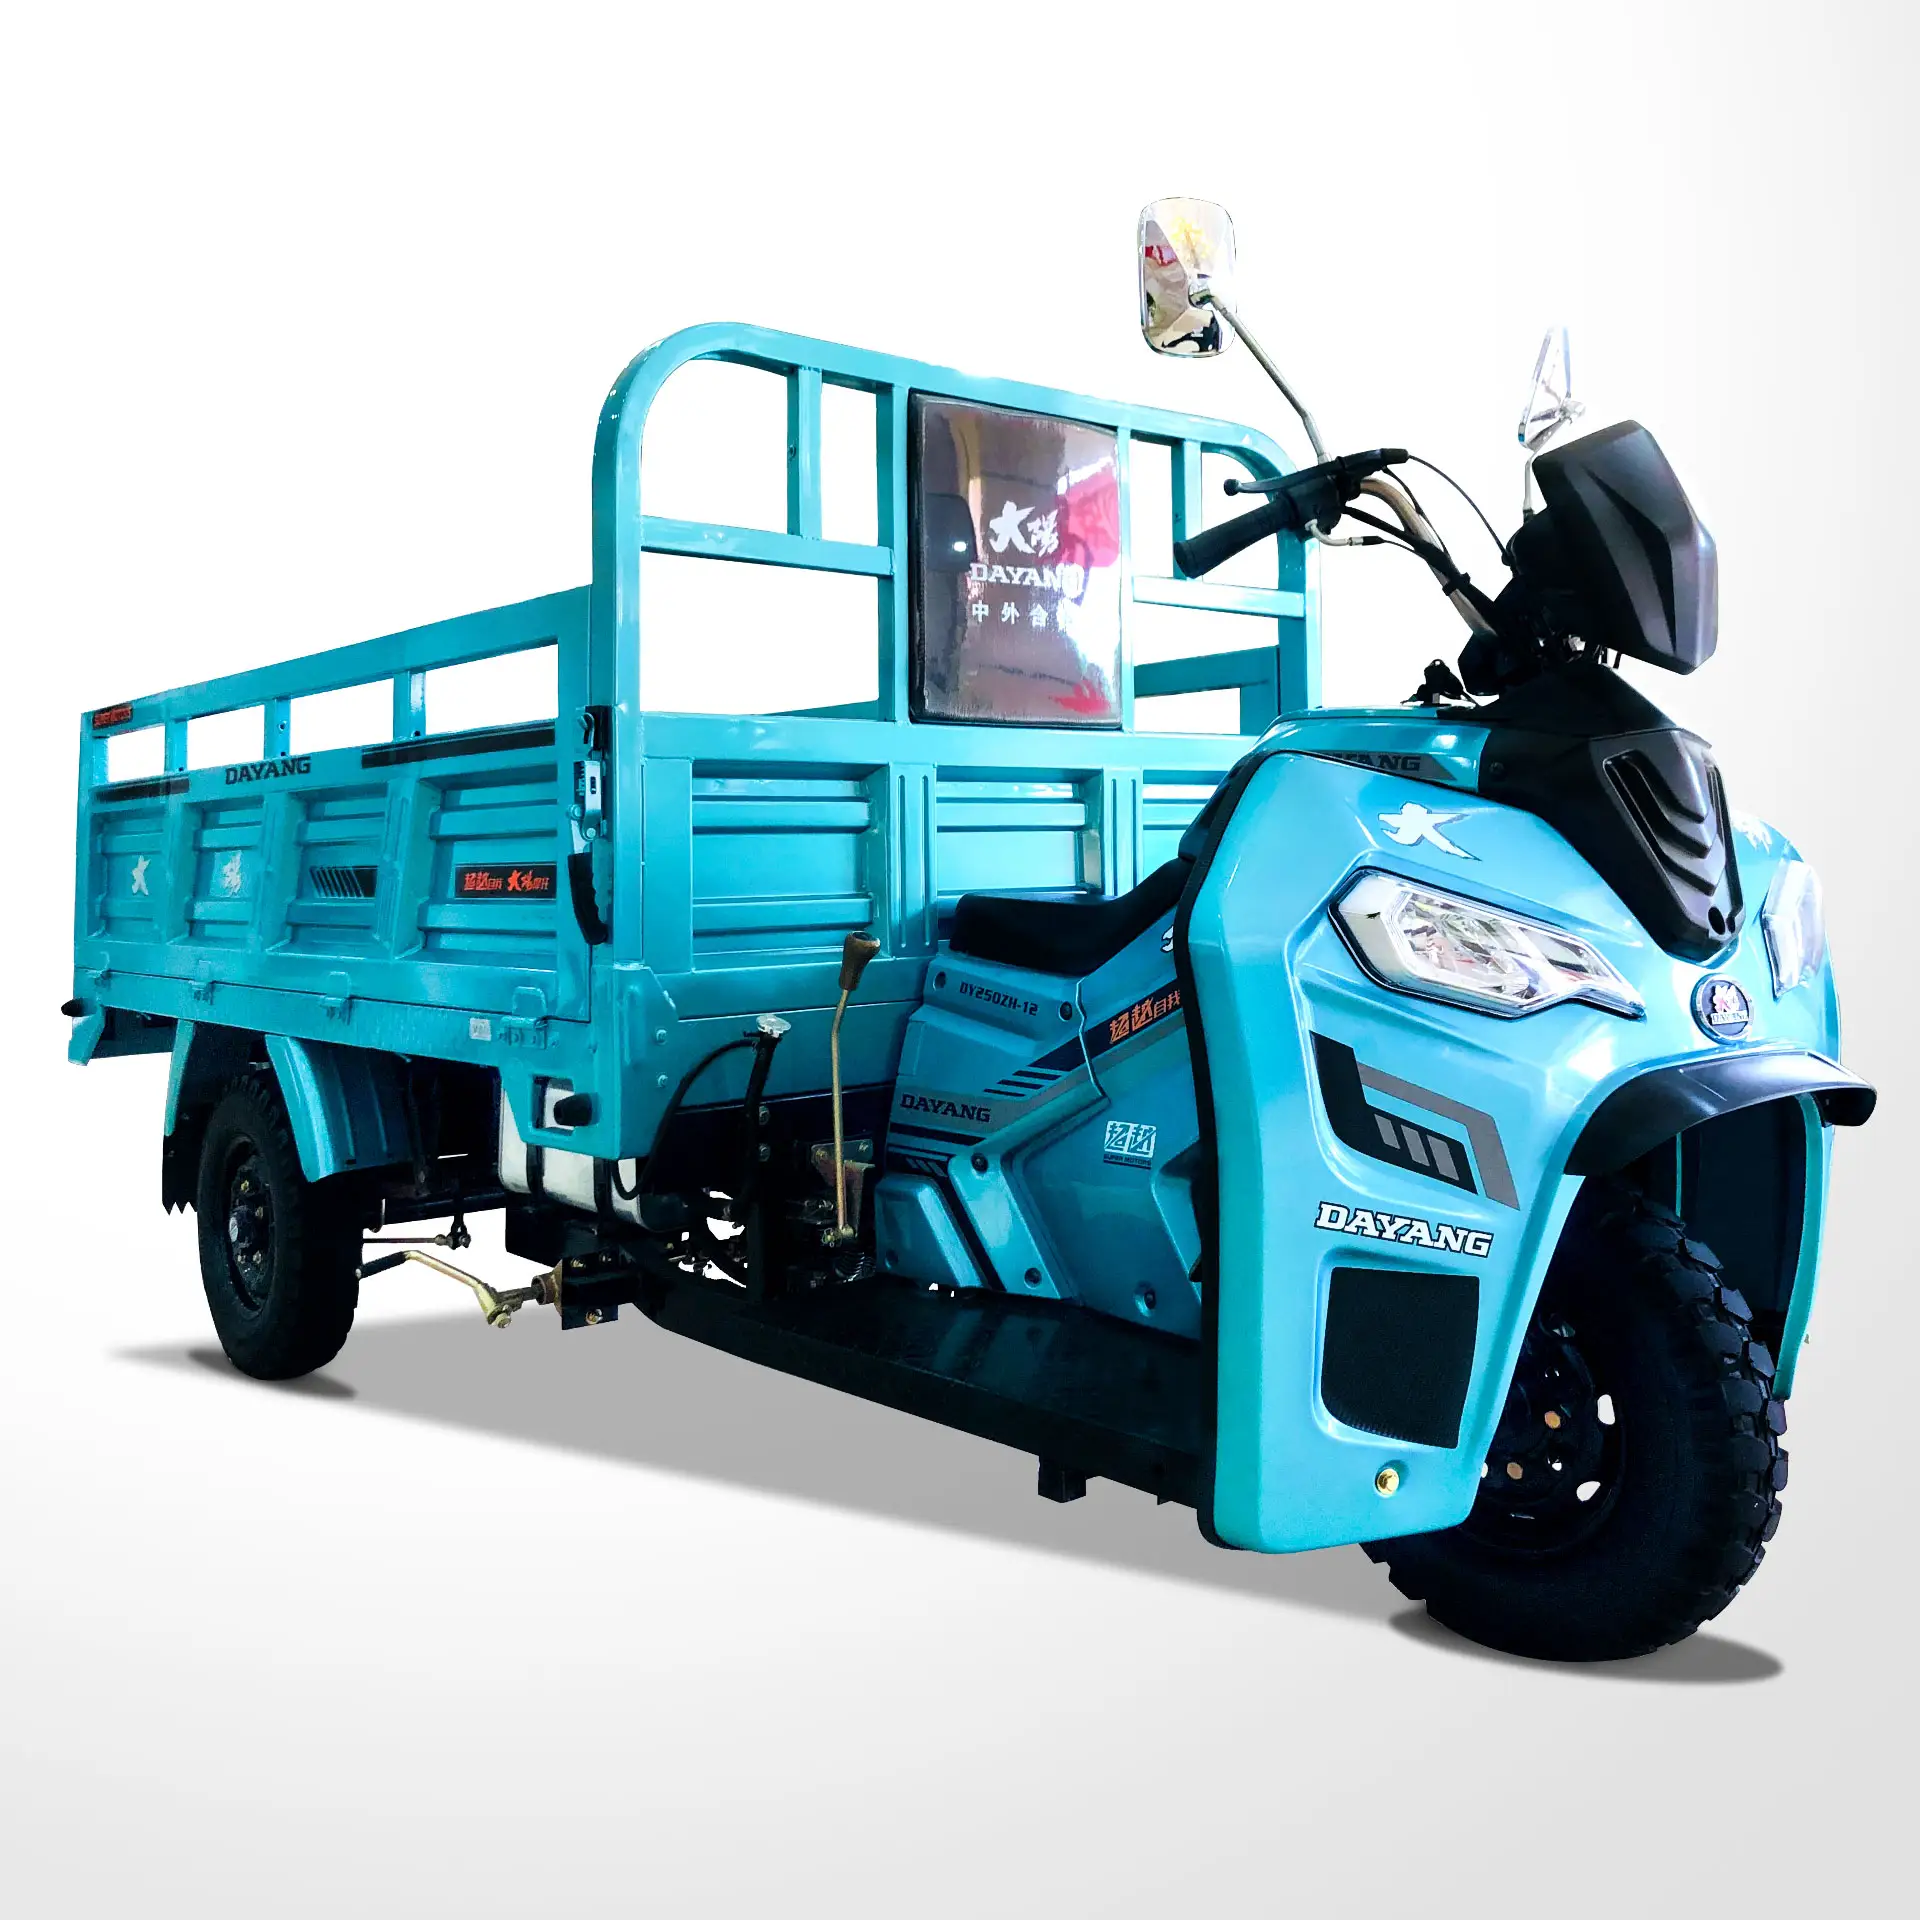 DAYANG 200cc/250cc/300cc Tricycle 3 Wheels Dumper Truck 1 Ton Carrying Cargo Motorcycle Safe Durable Automatic